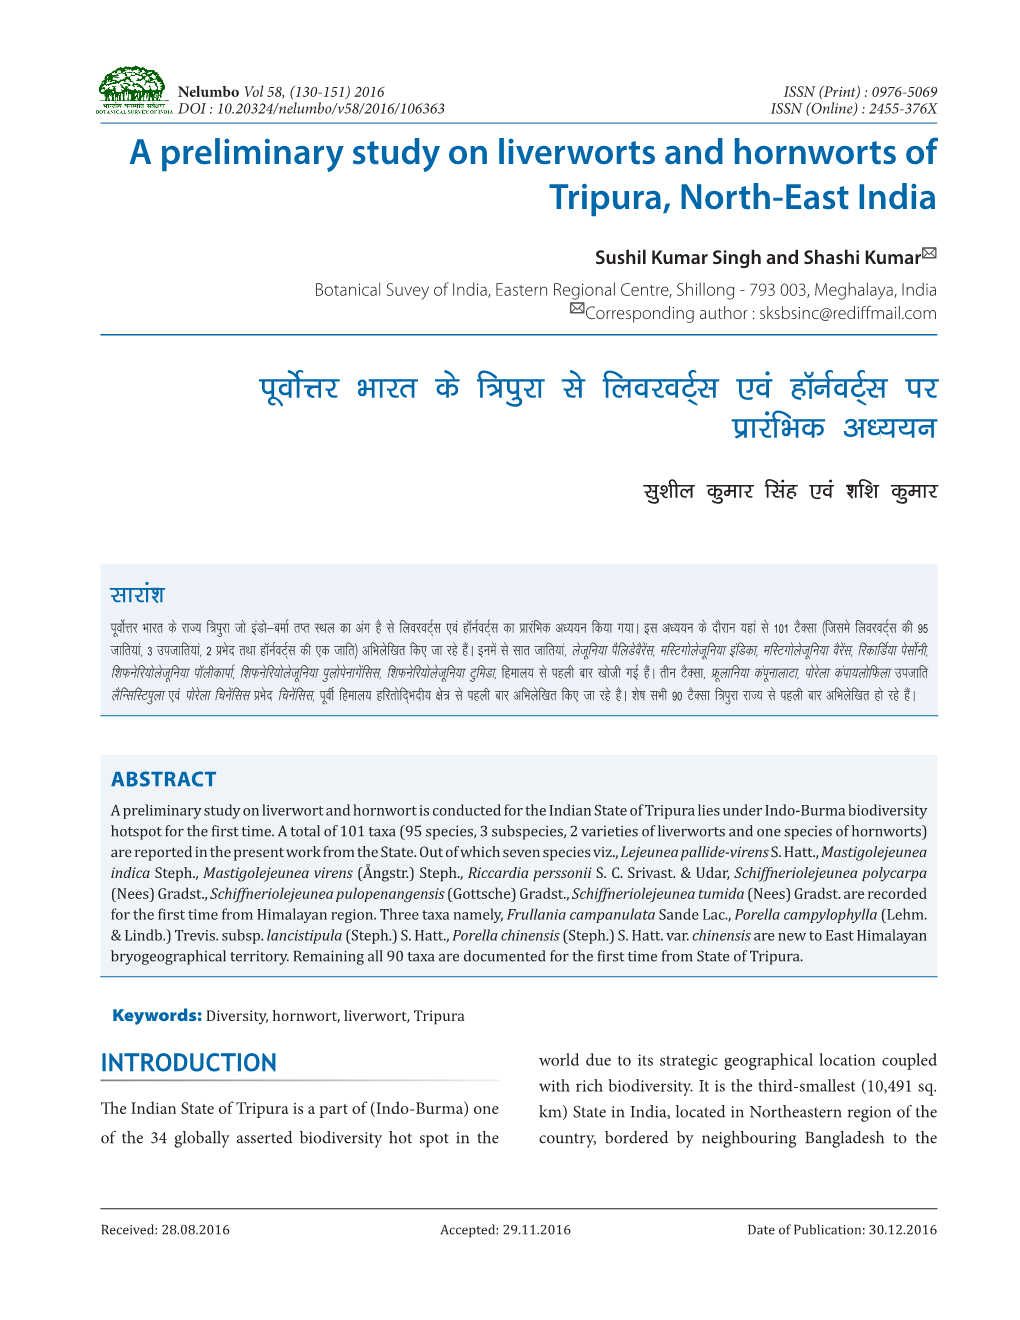 A Preliminary Study on Liverworts and Hornworts of Tripura, North-East India